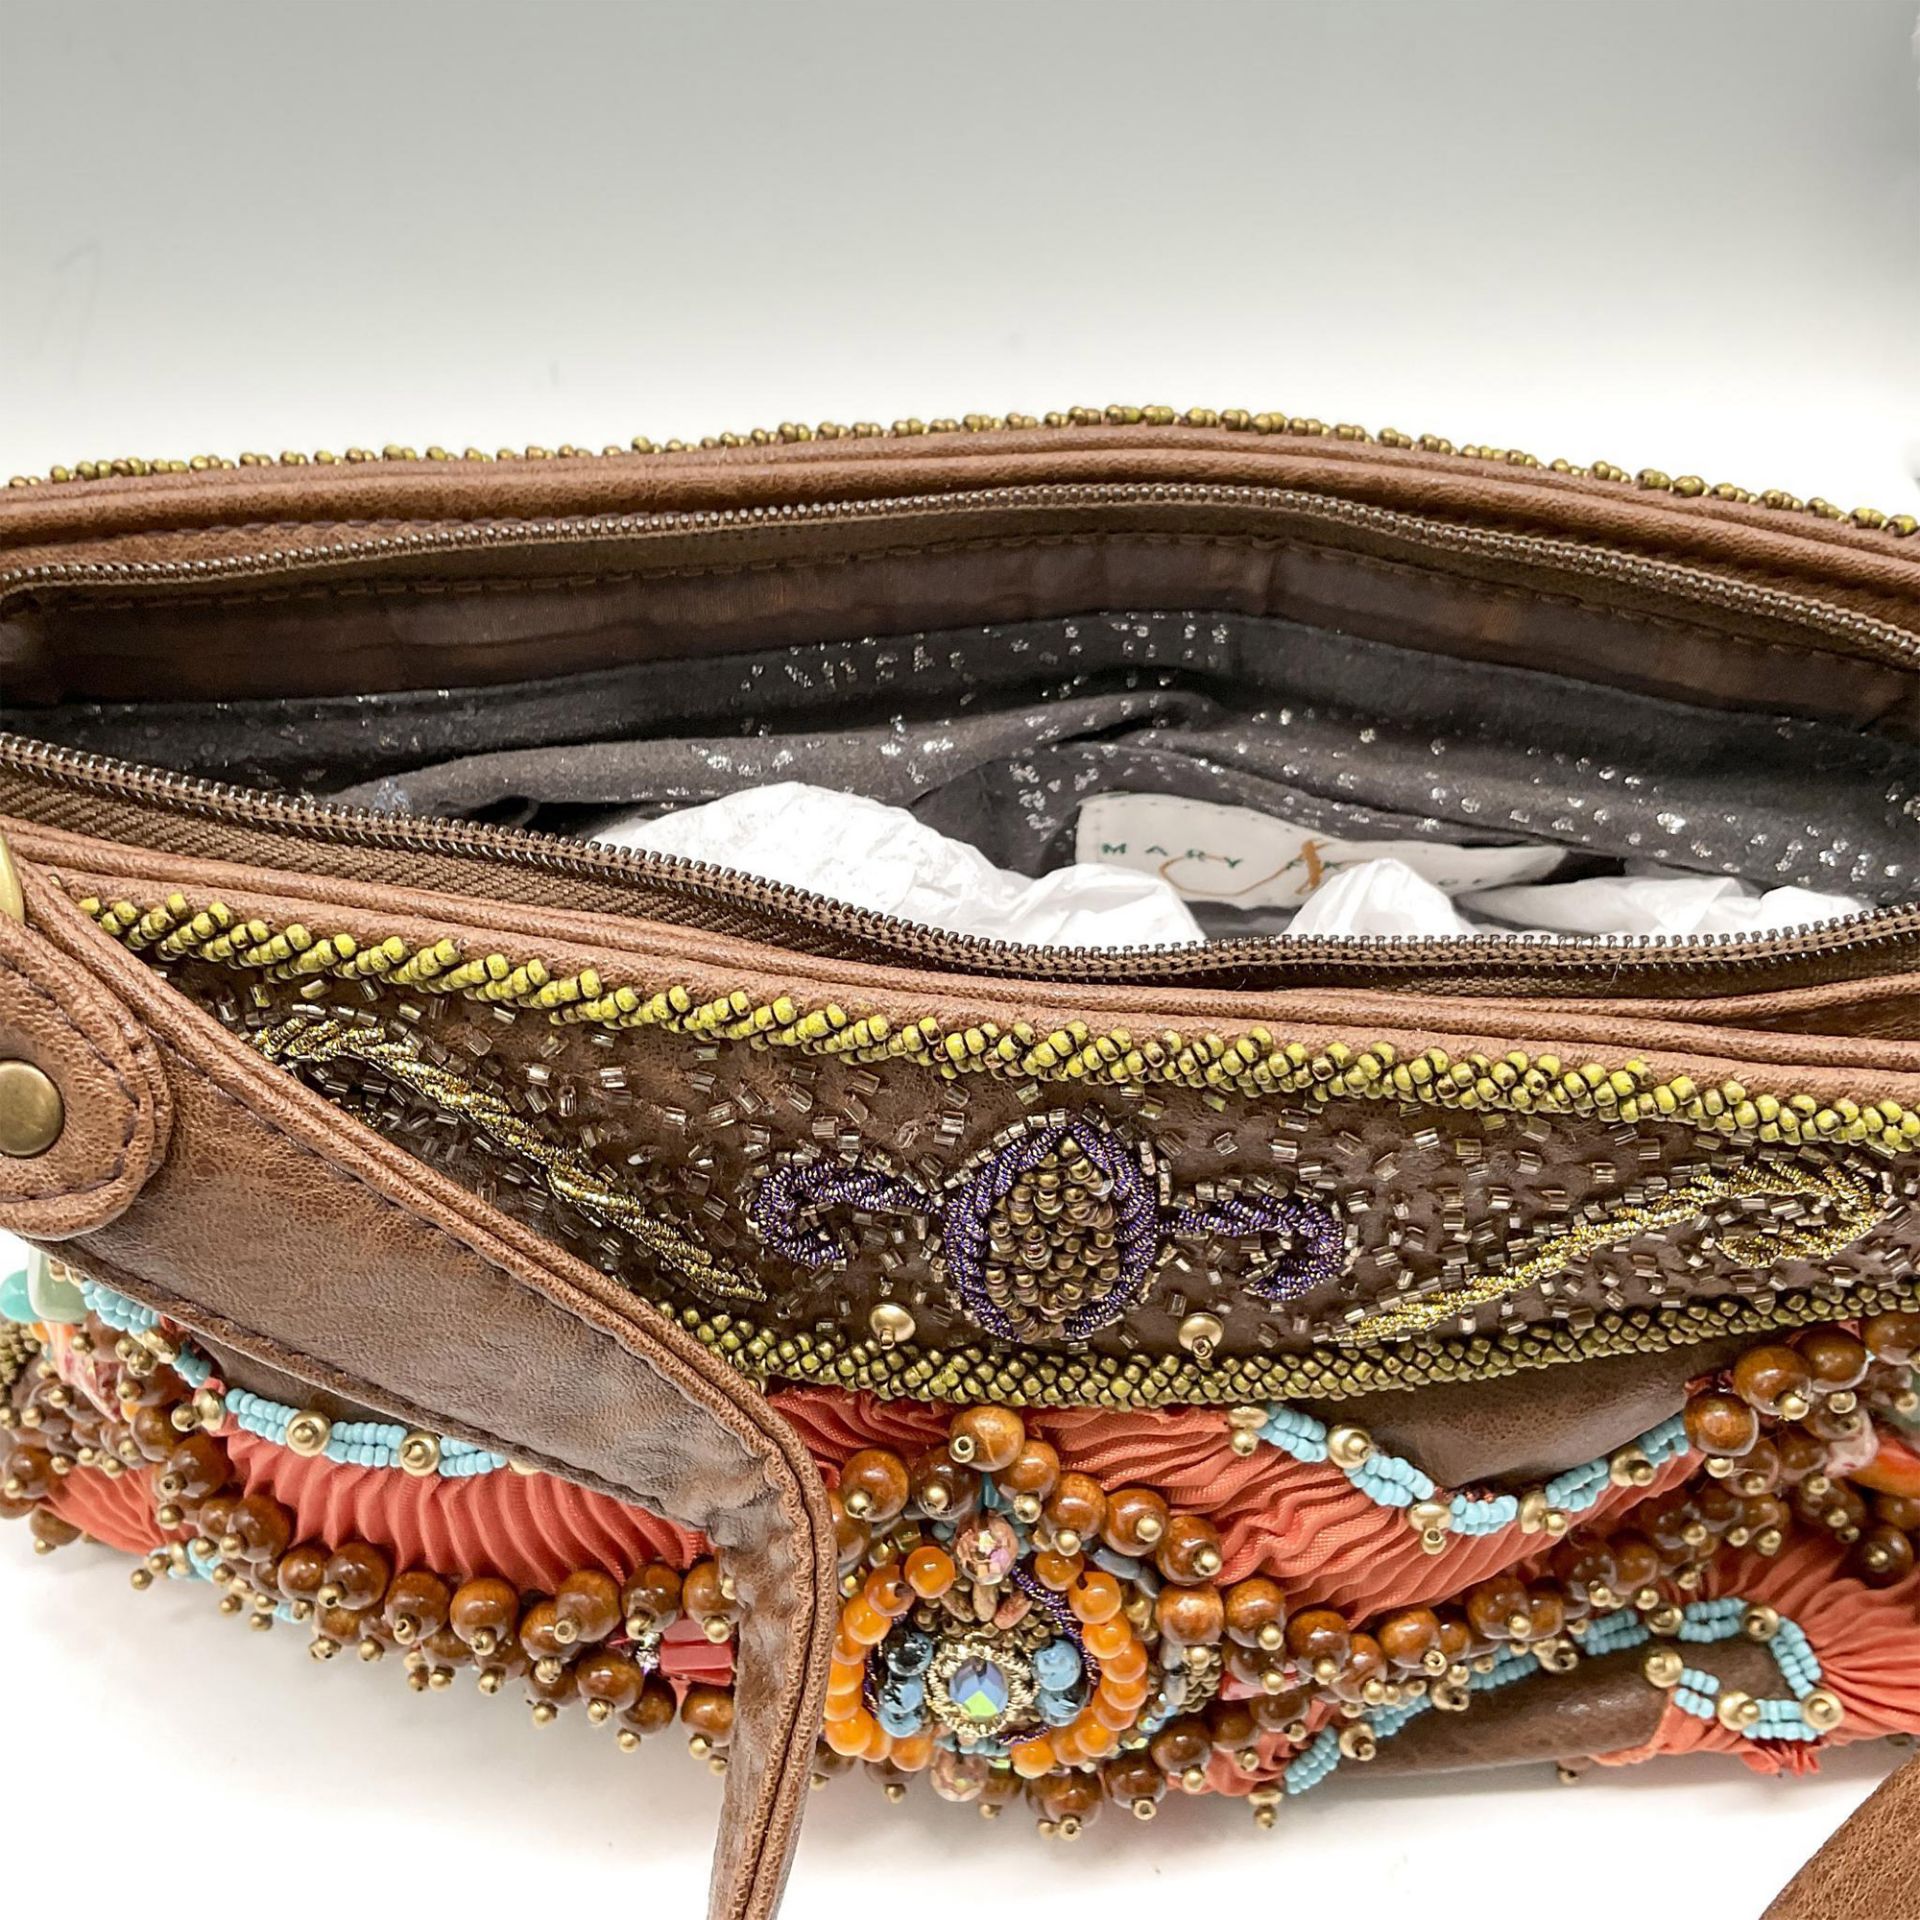 Mary Frances Hand Bag, Indian Summer - Image 3 of 4